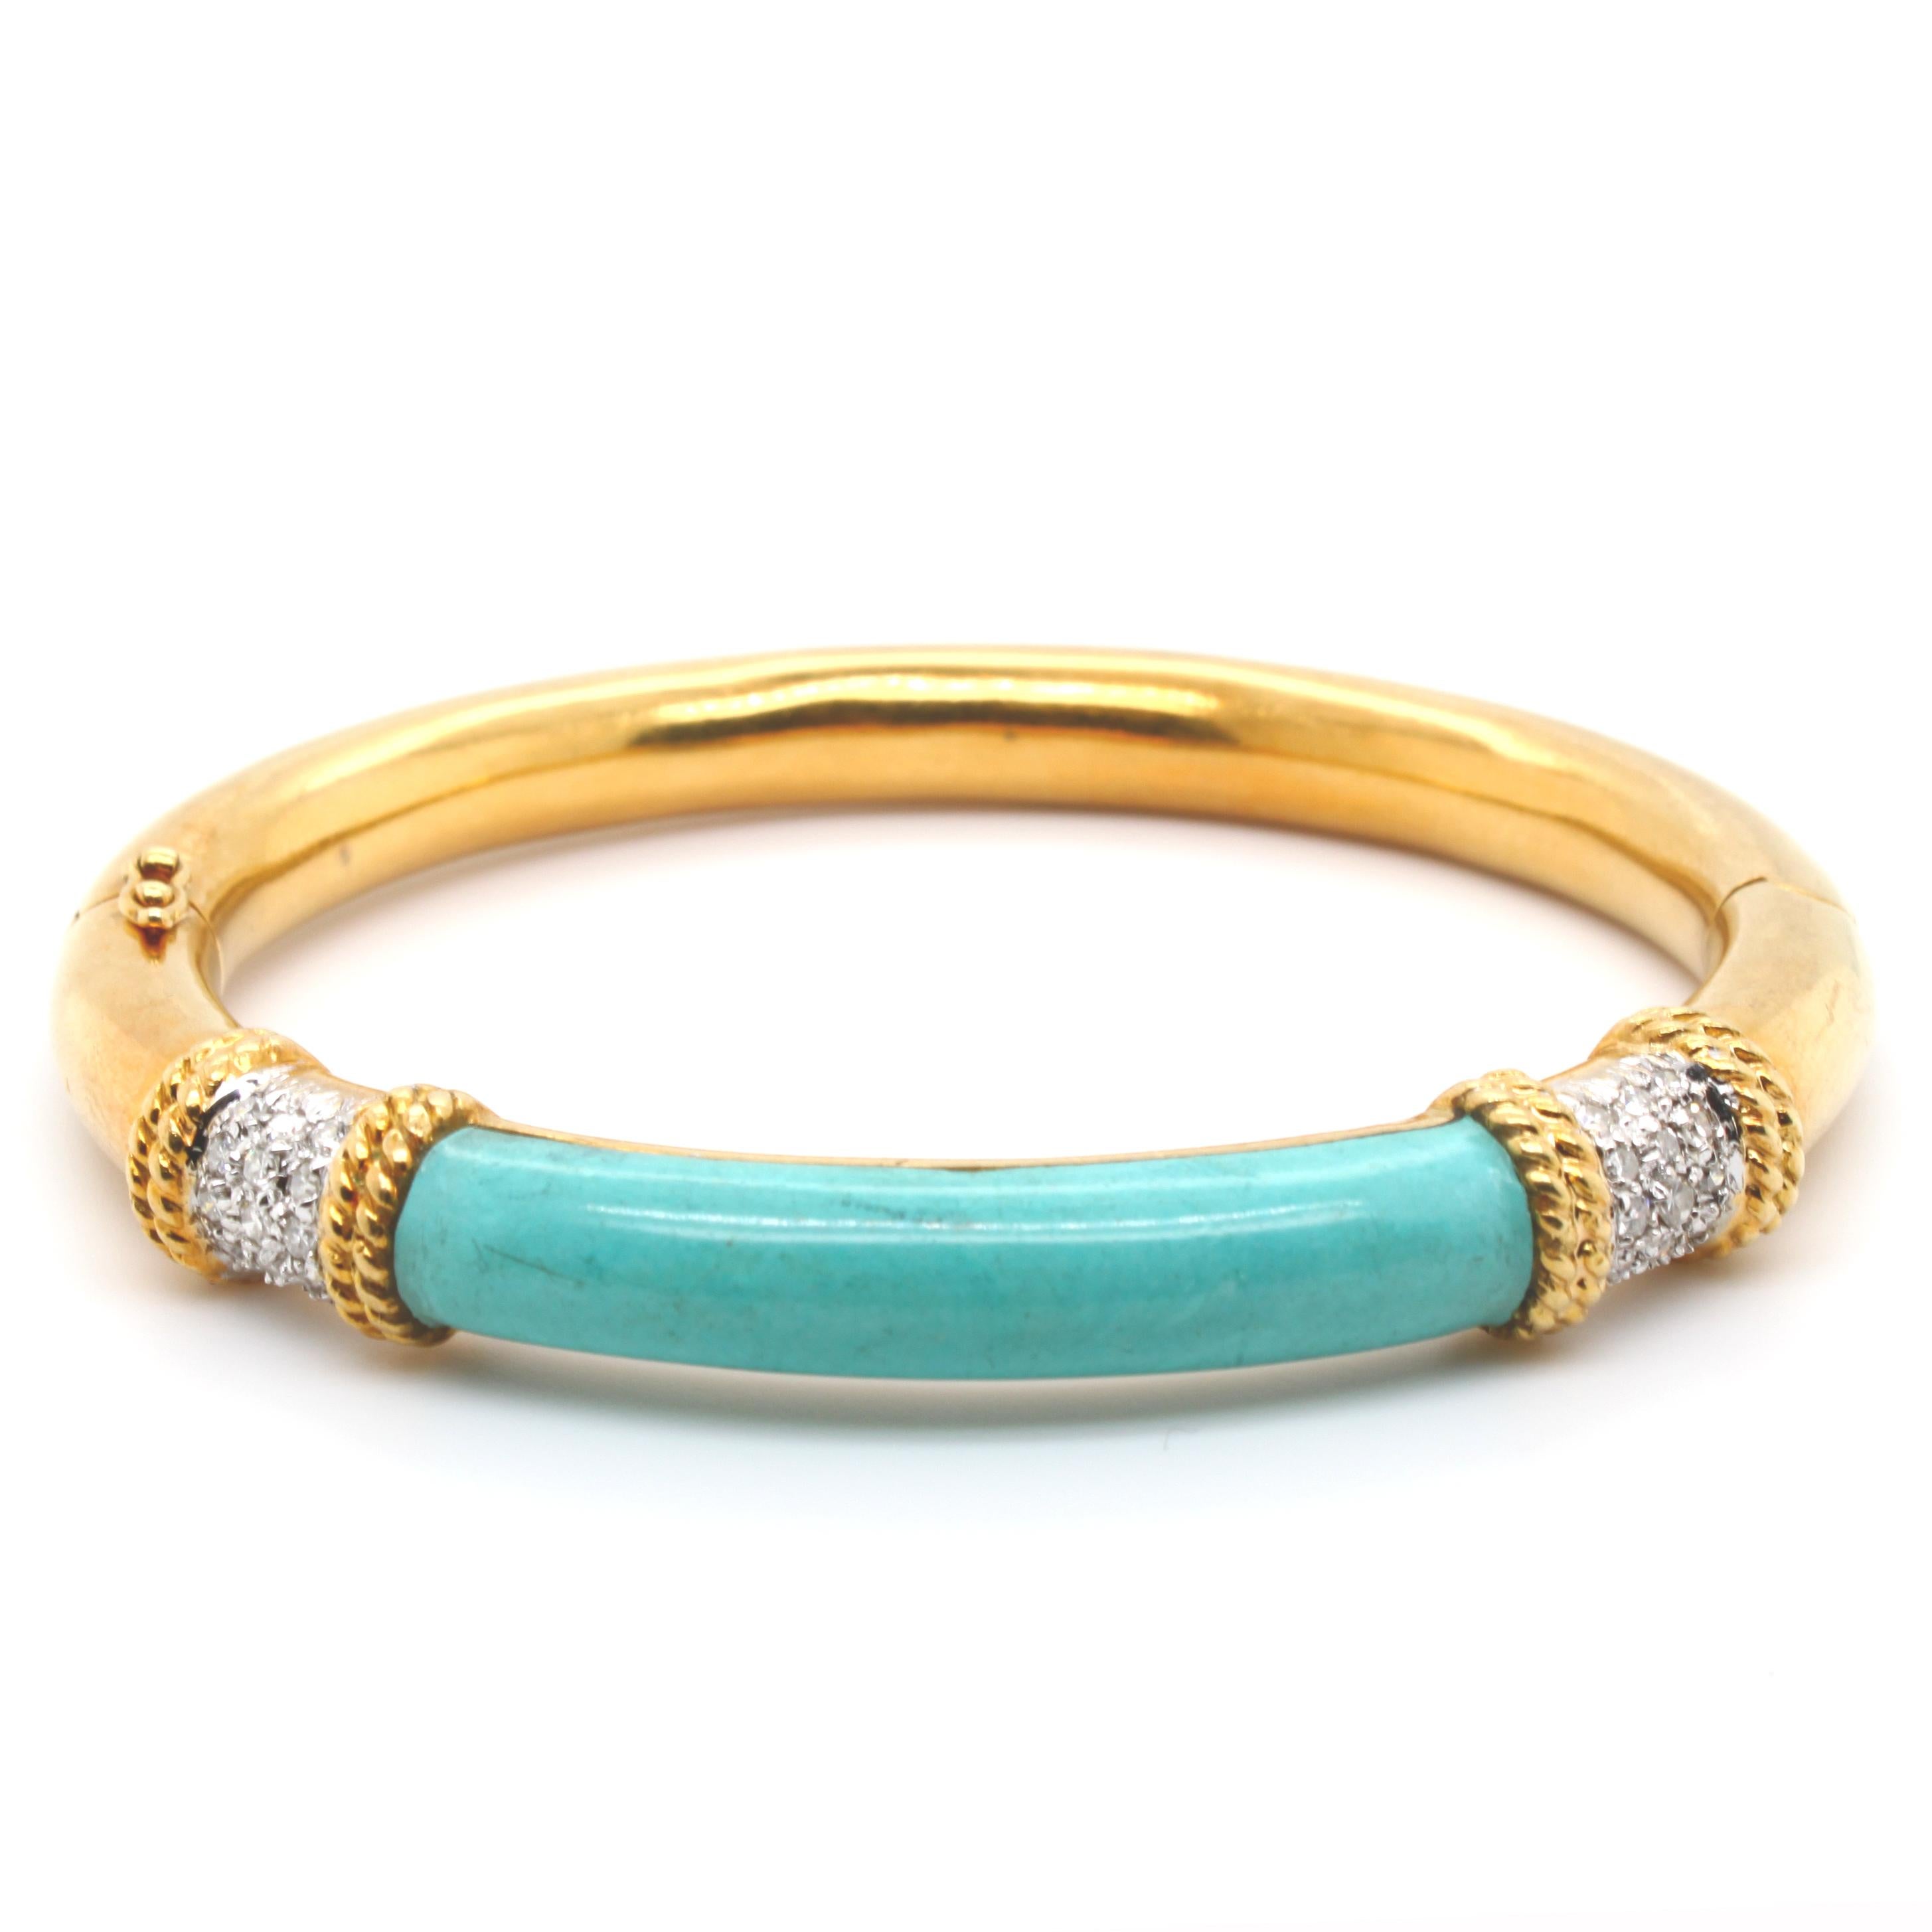 A lovely everyday gold bangle with an unusual curved turquoise top in yellow gold. It is bordered by gold wires and round brilliant cut diamonds. The bangle has a hinge and big opening as well as a security clasp for easy and secure wearing. The